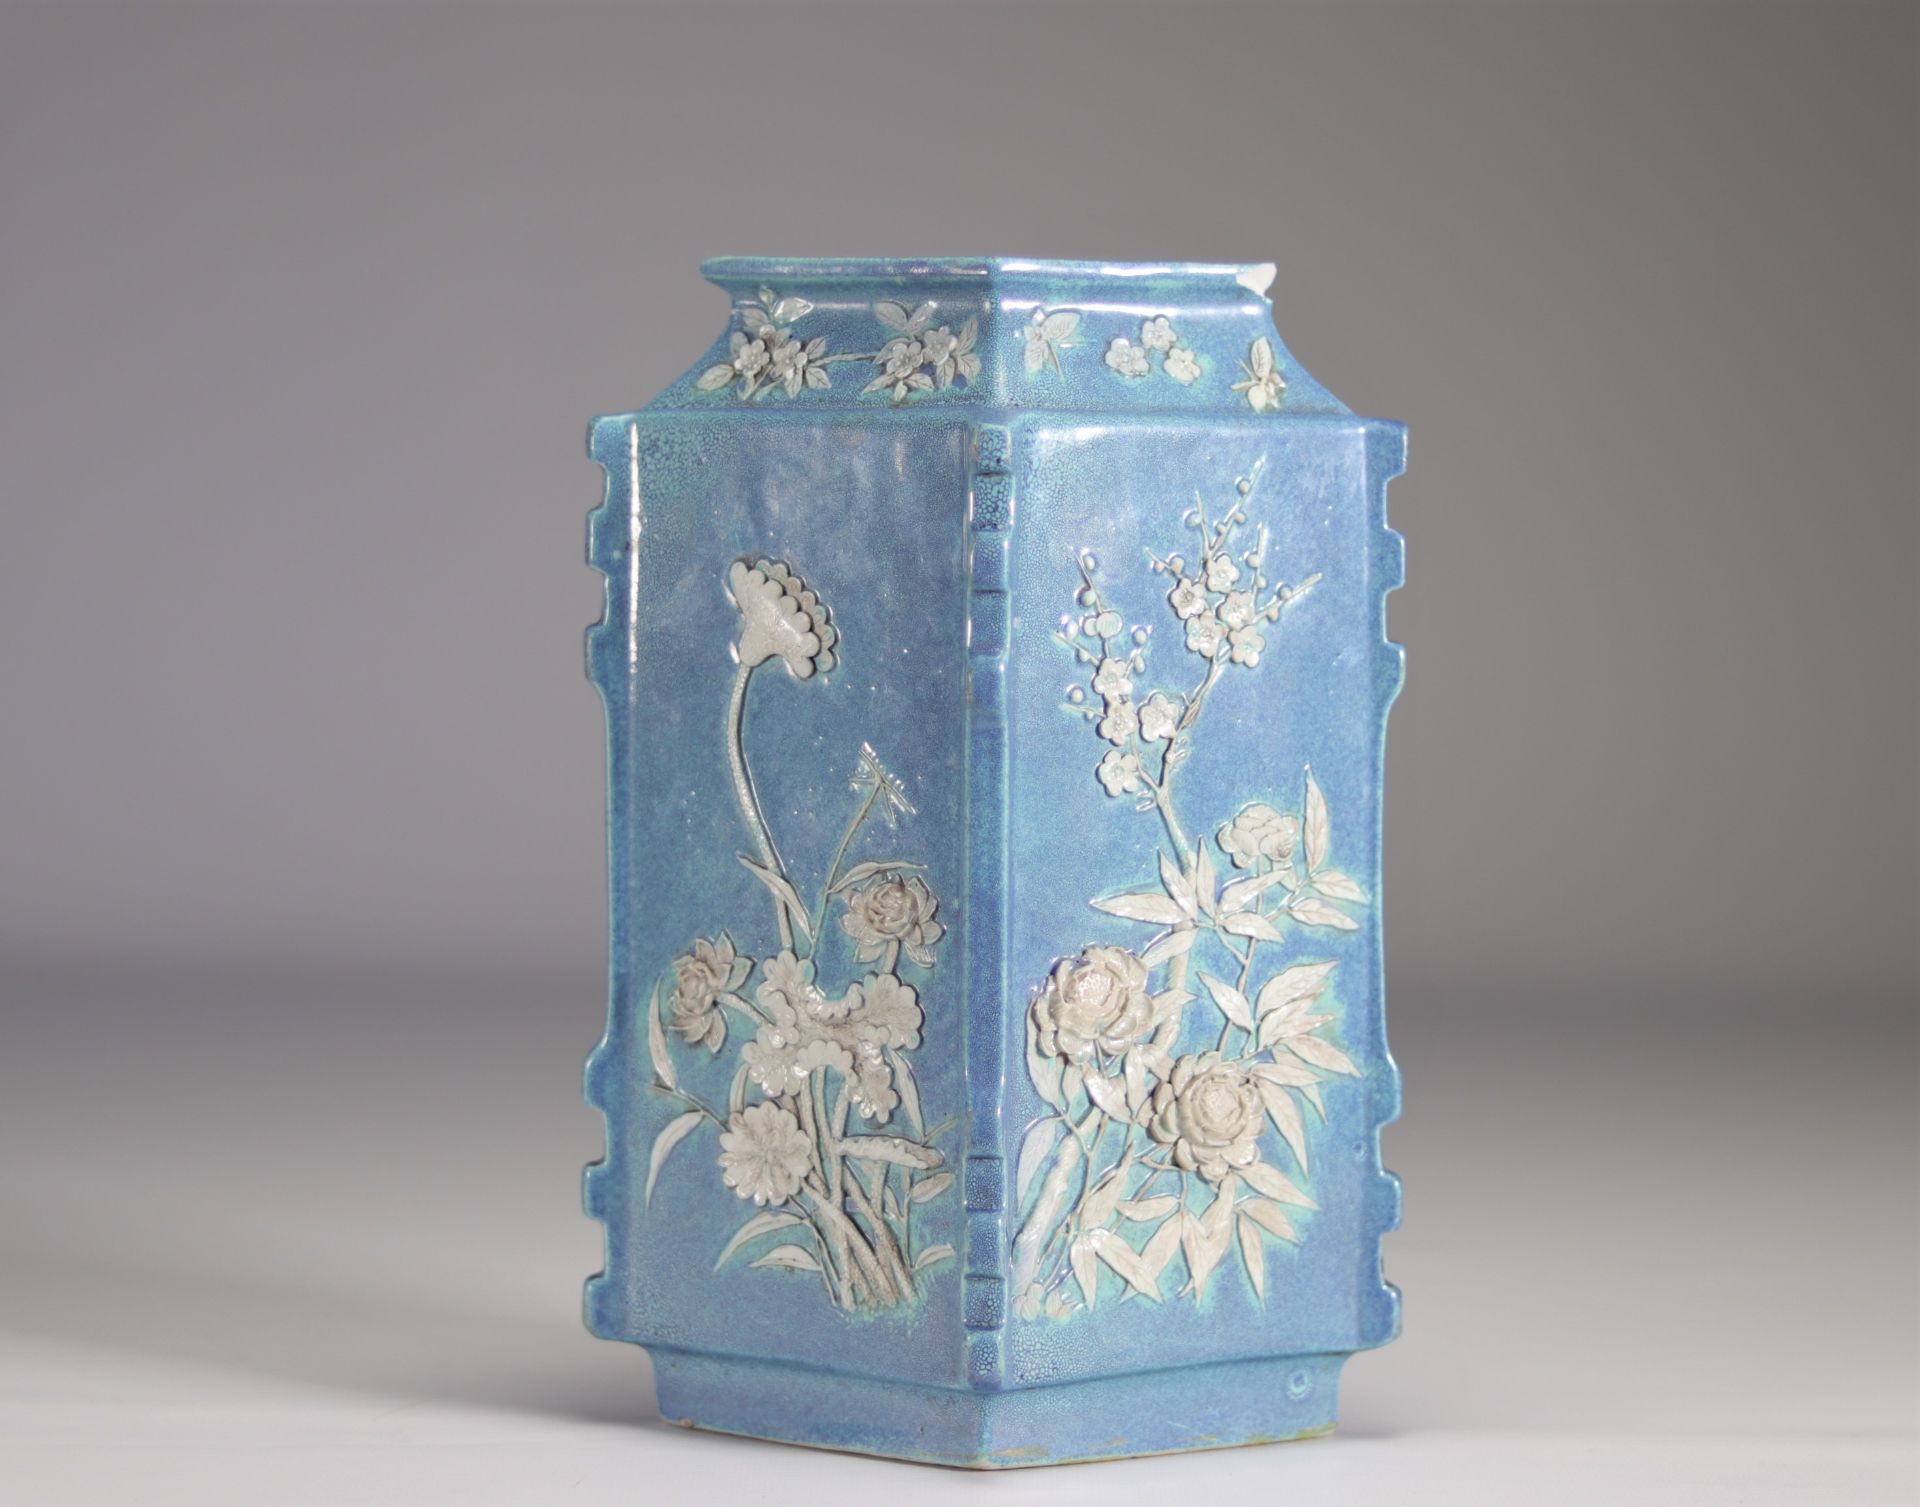 A Chinese porcelain vase decorated with flowers in relief on a light blue background from Qing perio - Image 3 of 5